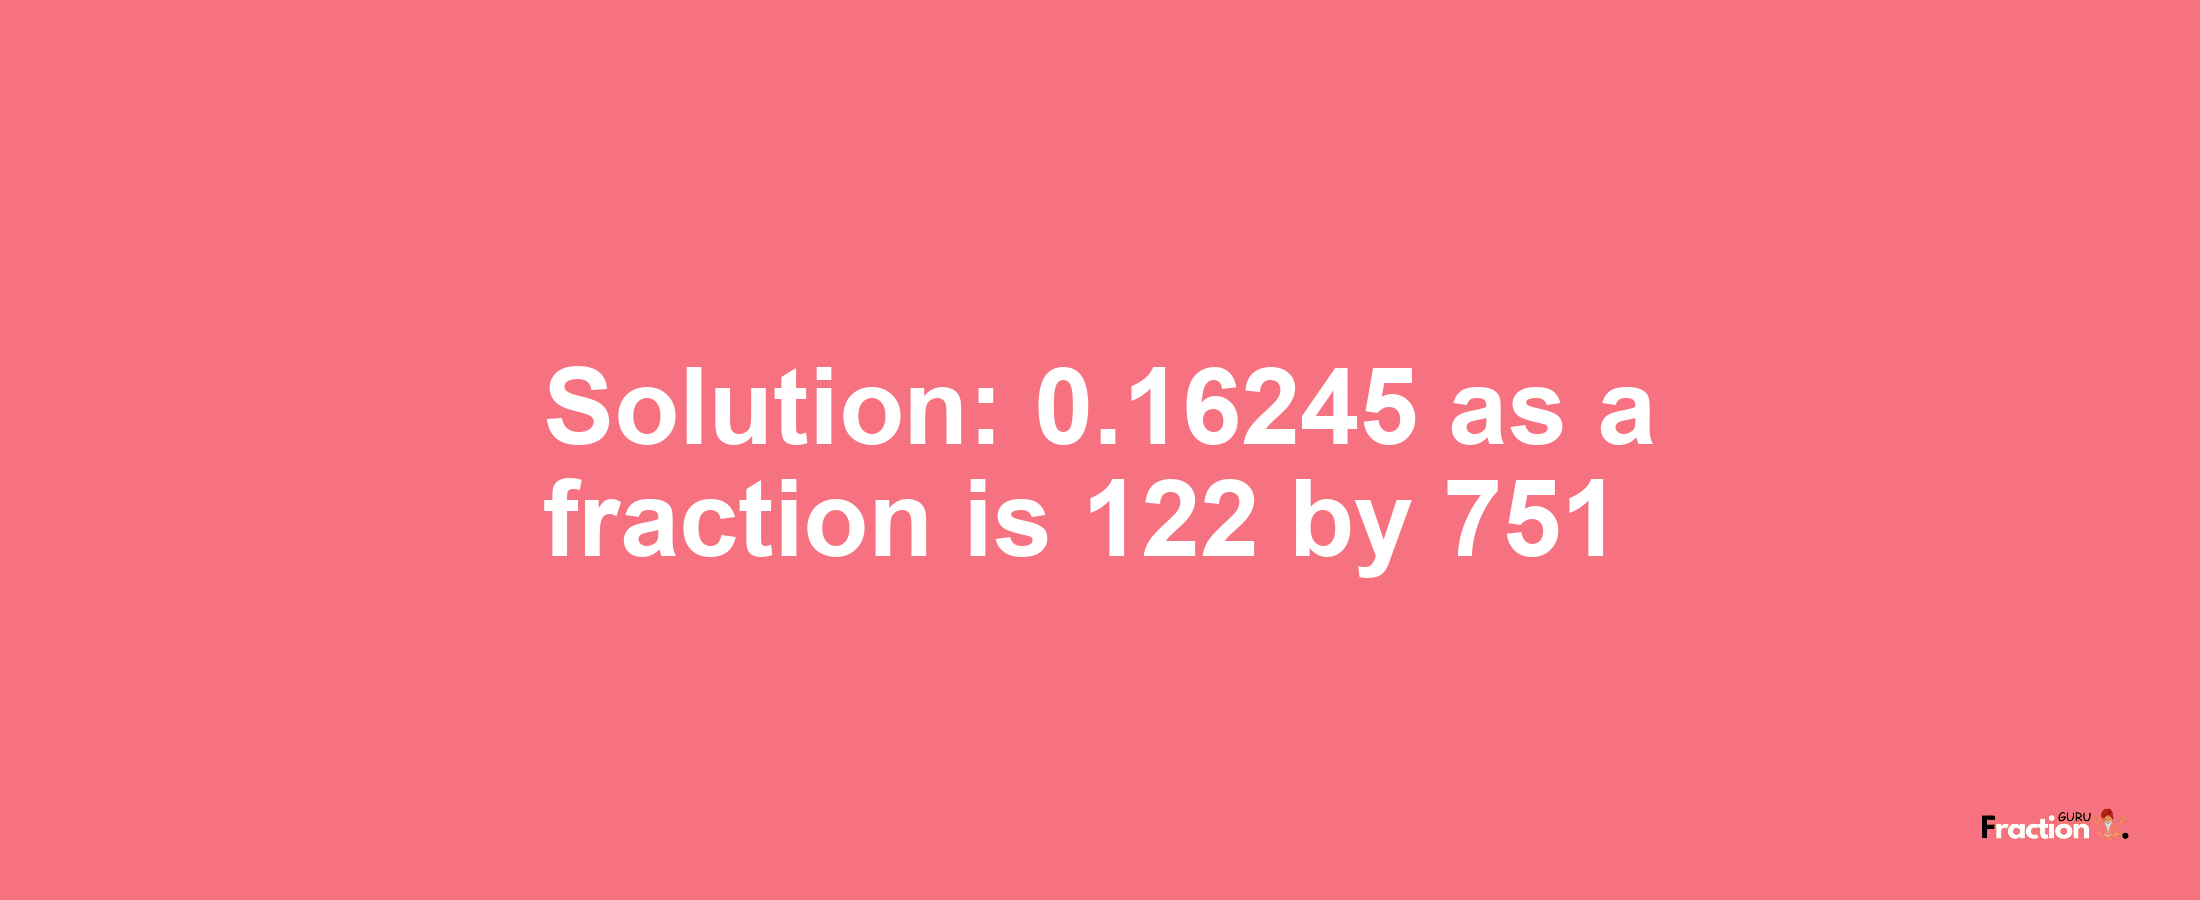 Solution:0.16245 as a fraction is 122/751